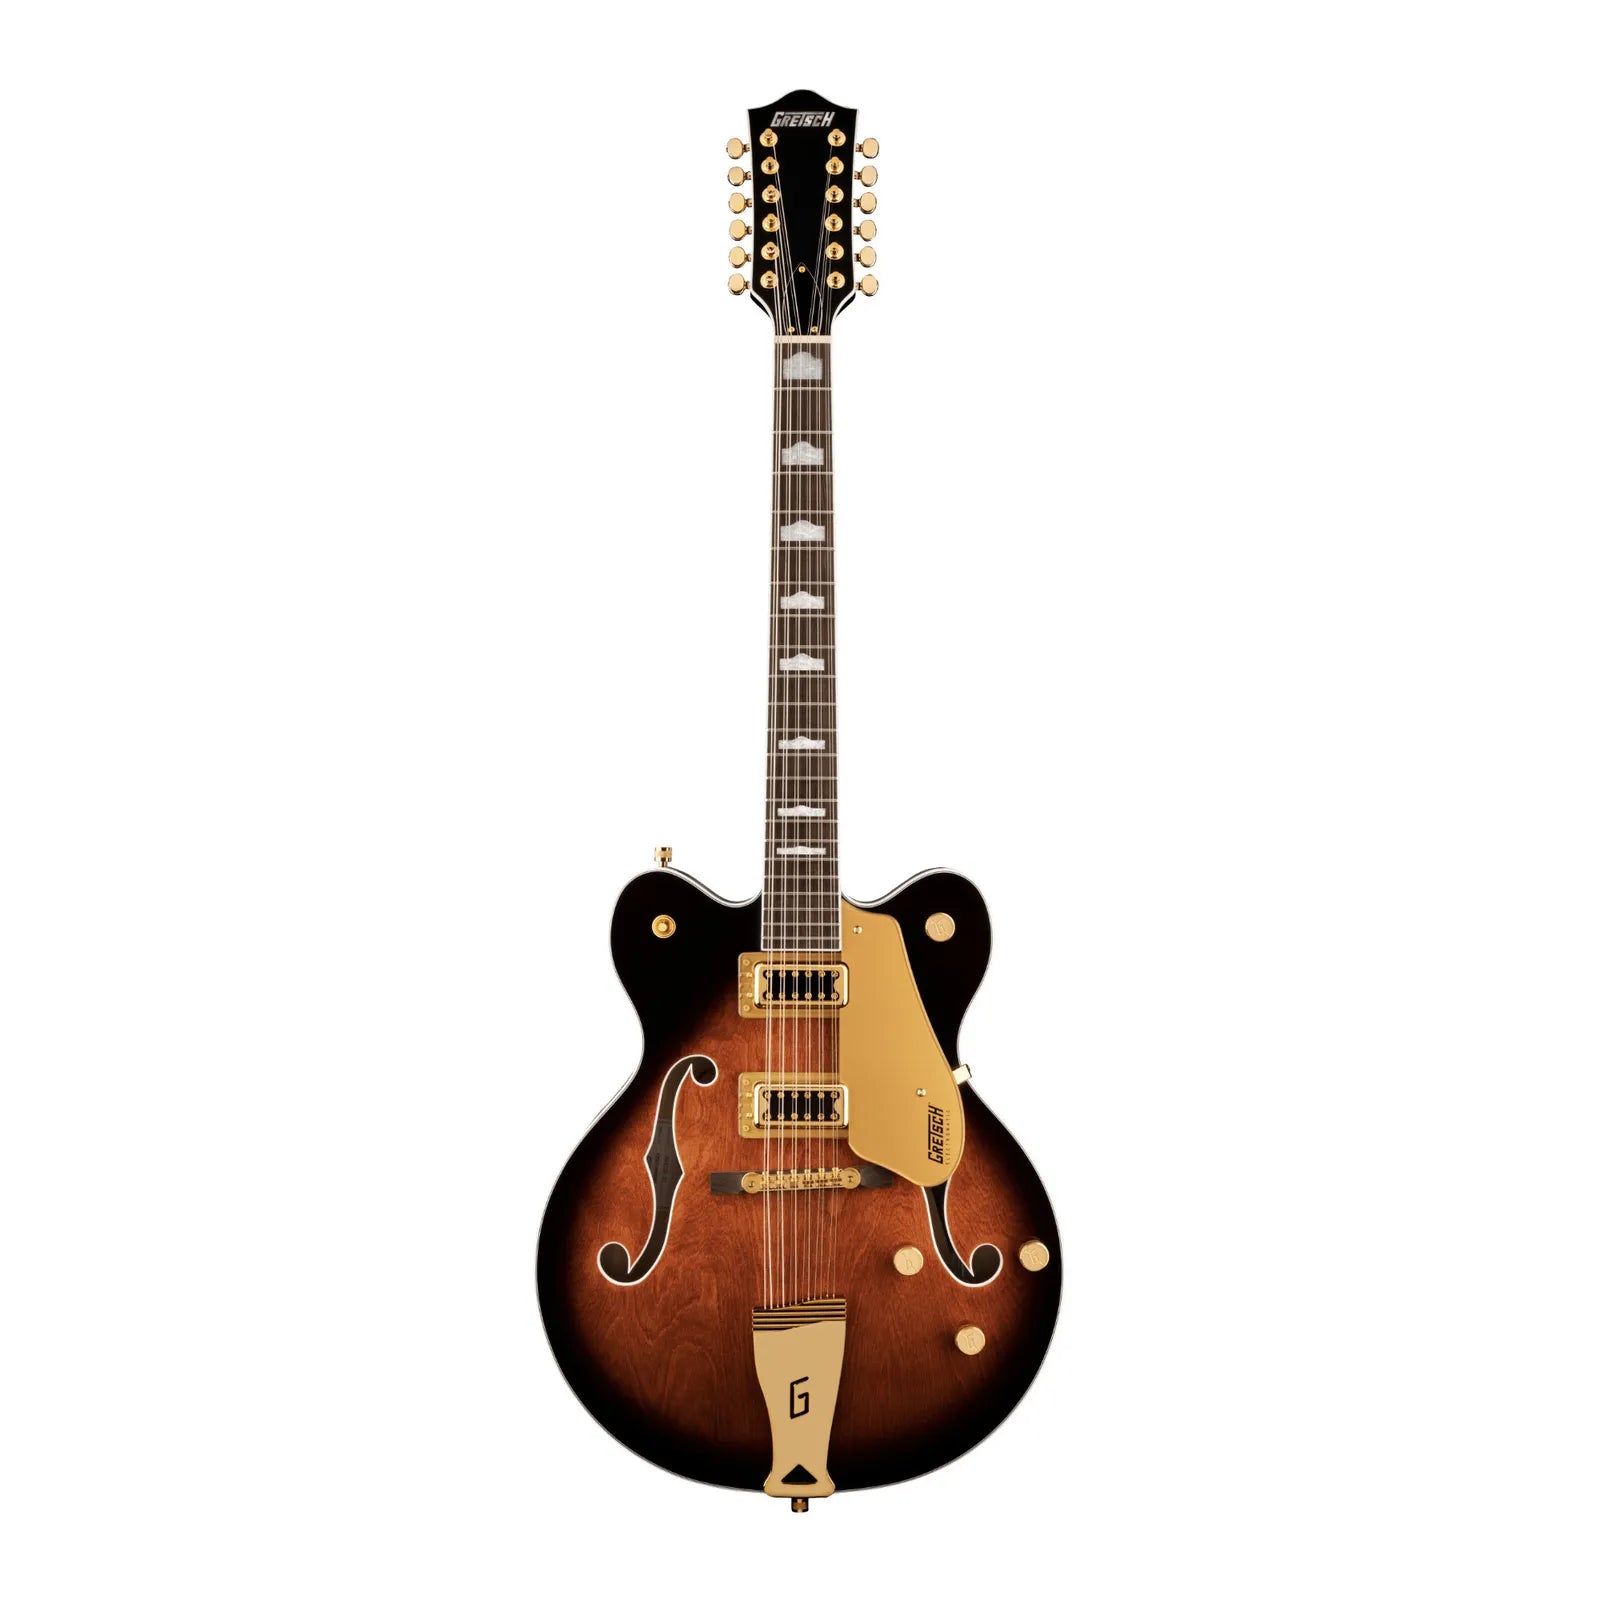 Gretsch G5422G-12 Electromatic Classic Hollow Body Double-Cut 12-String Guitar with Gold Hardware and Laurel Fingerboard - Single Barrel Burst